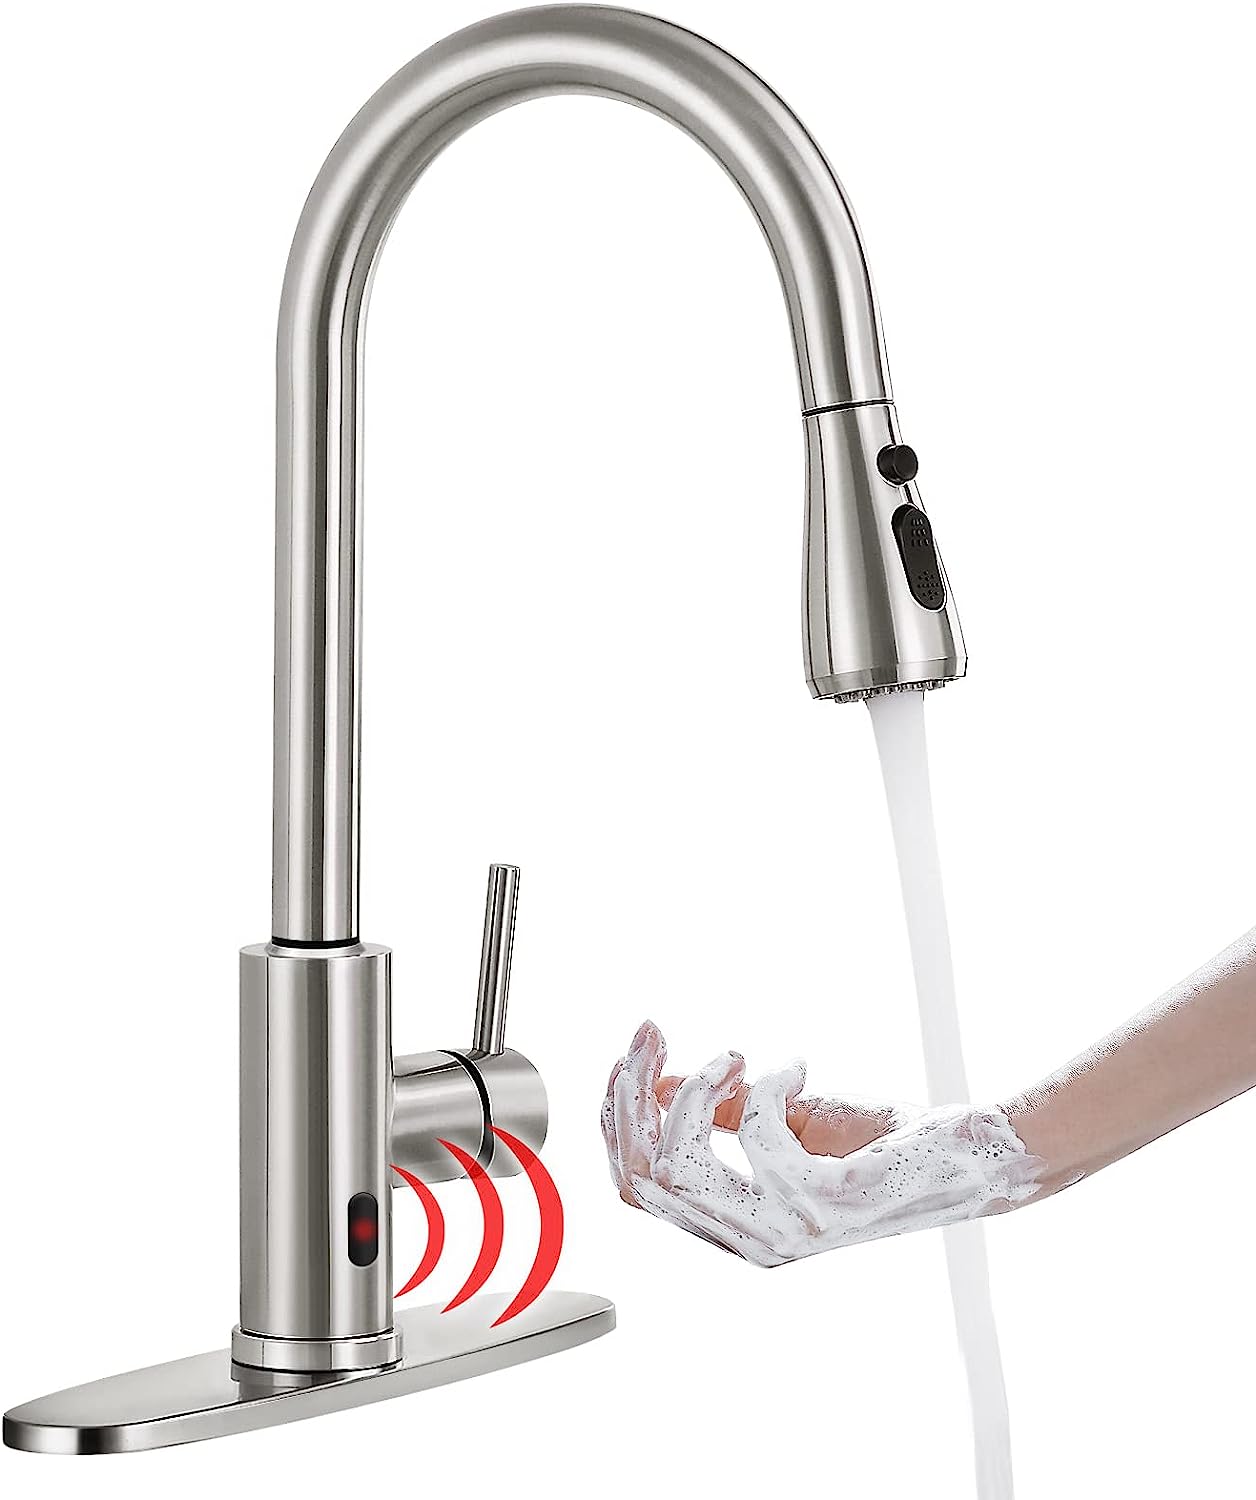 FGKQ Touchless Kitchen Faucet with Pull Down Sprayer, [...]